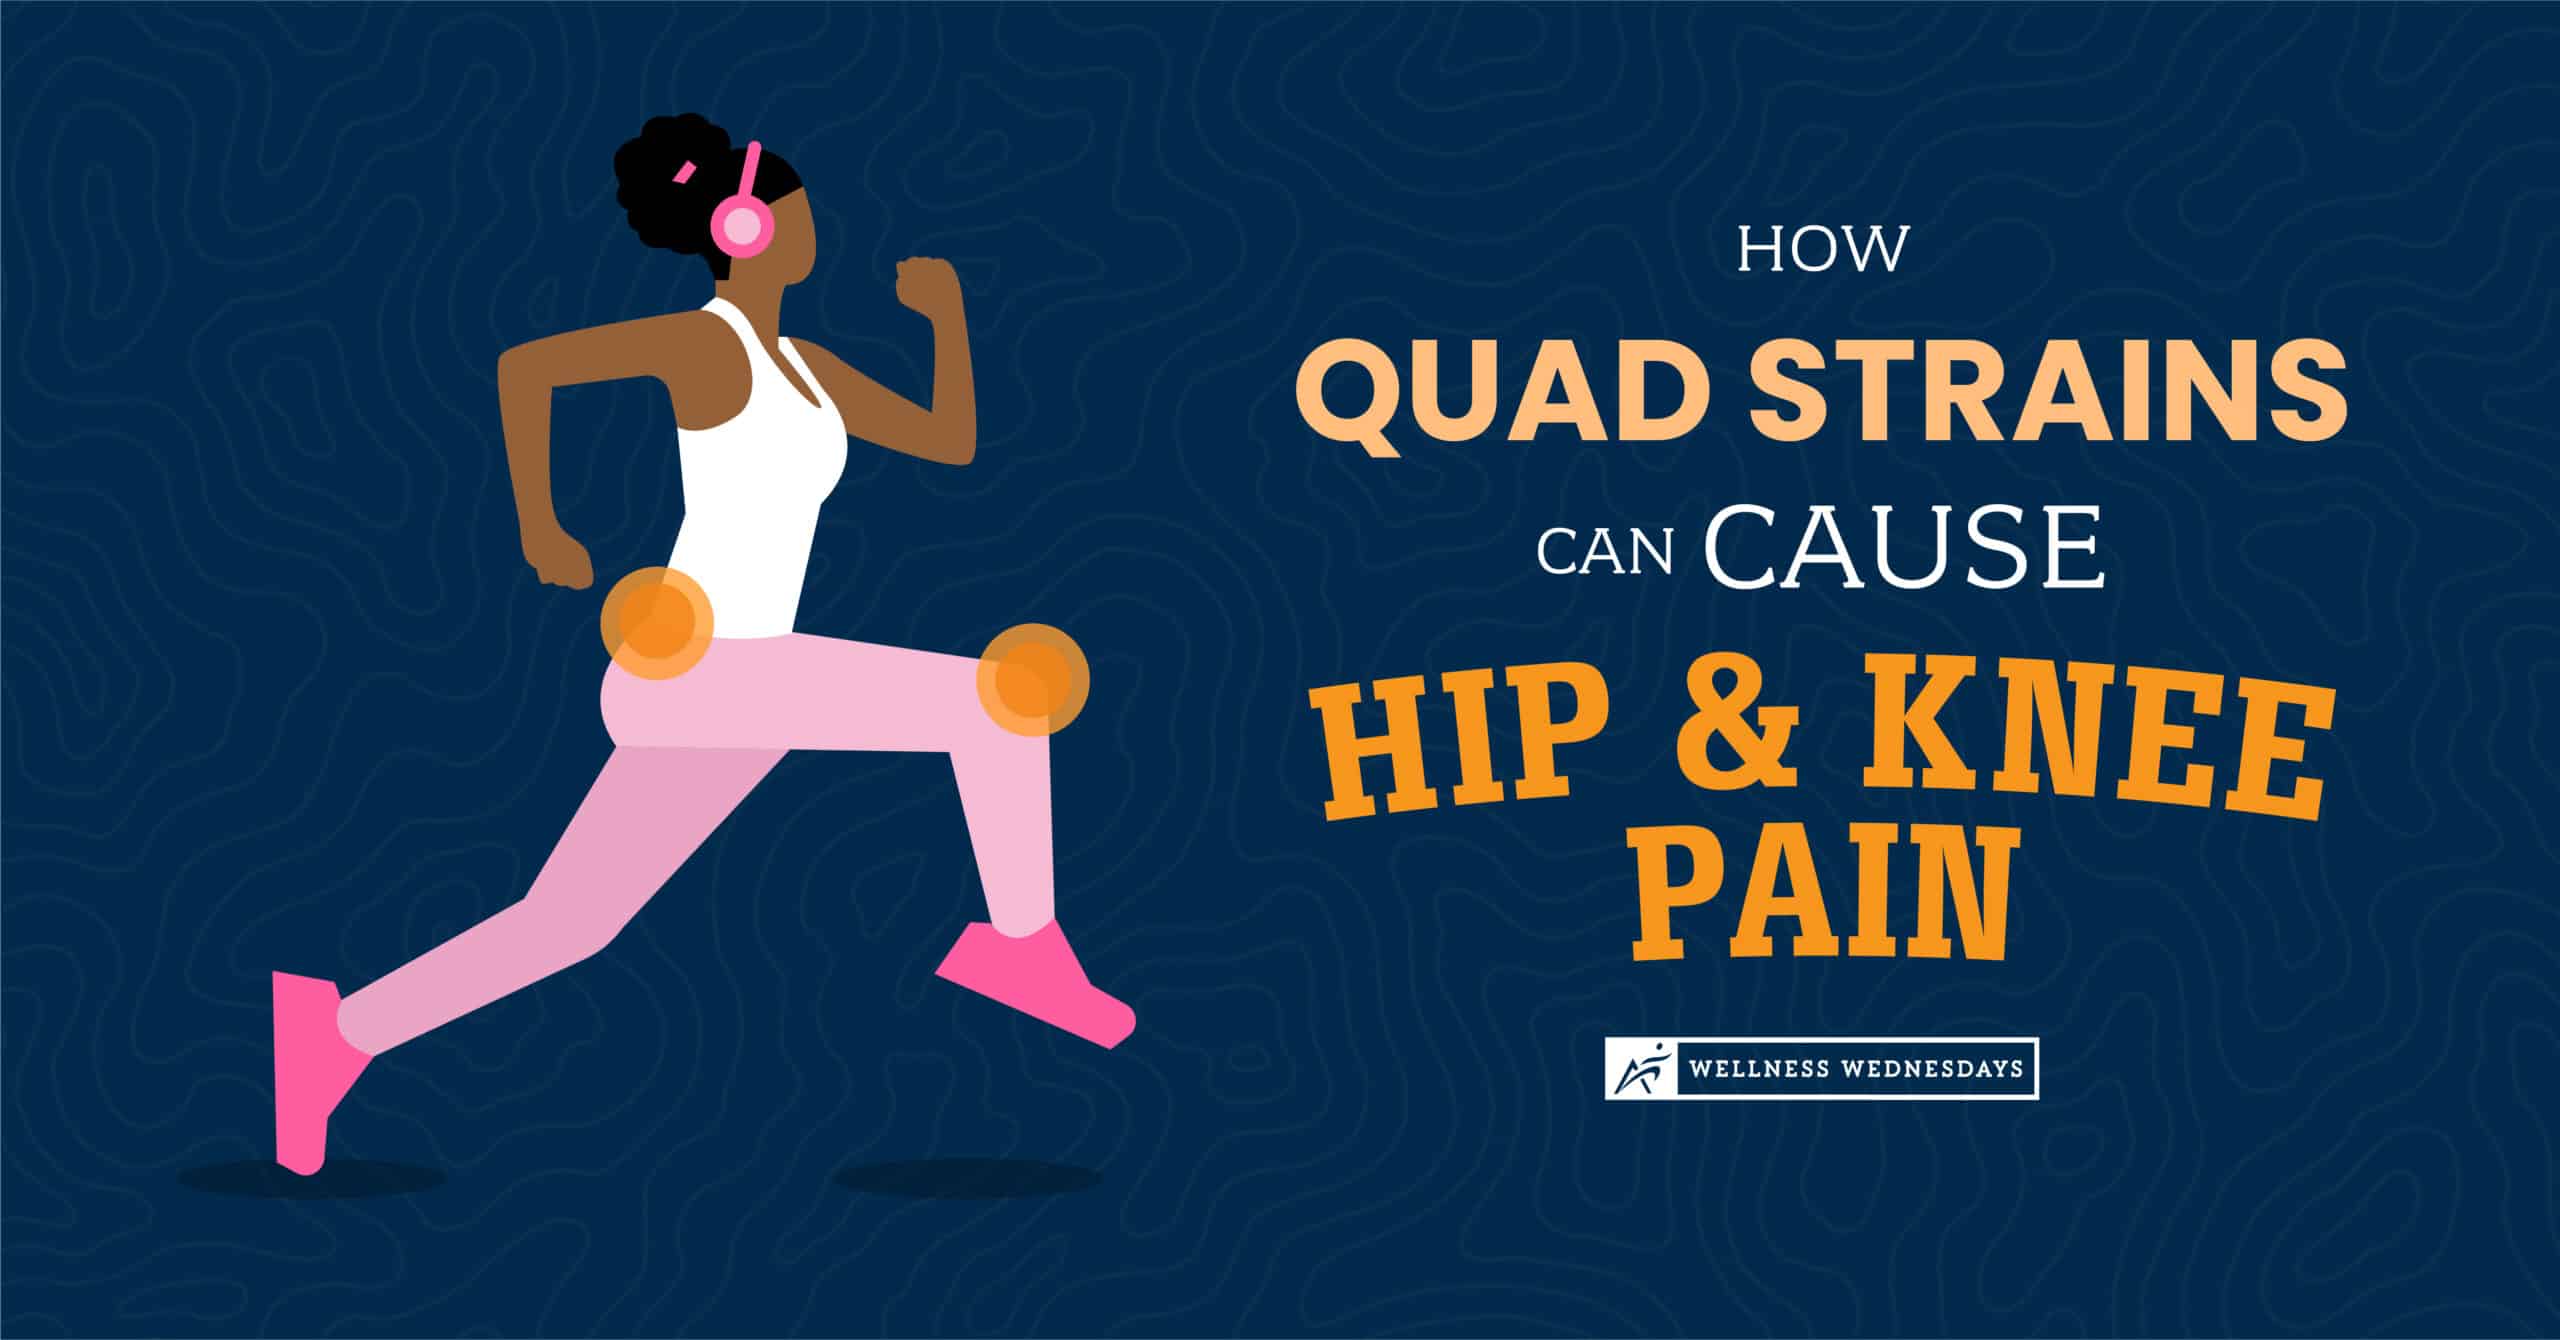 How Quad Strains Can Cause Hip & Knee Pain